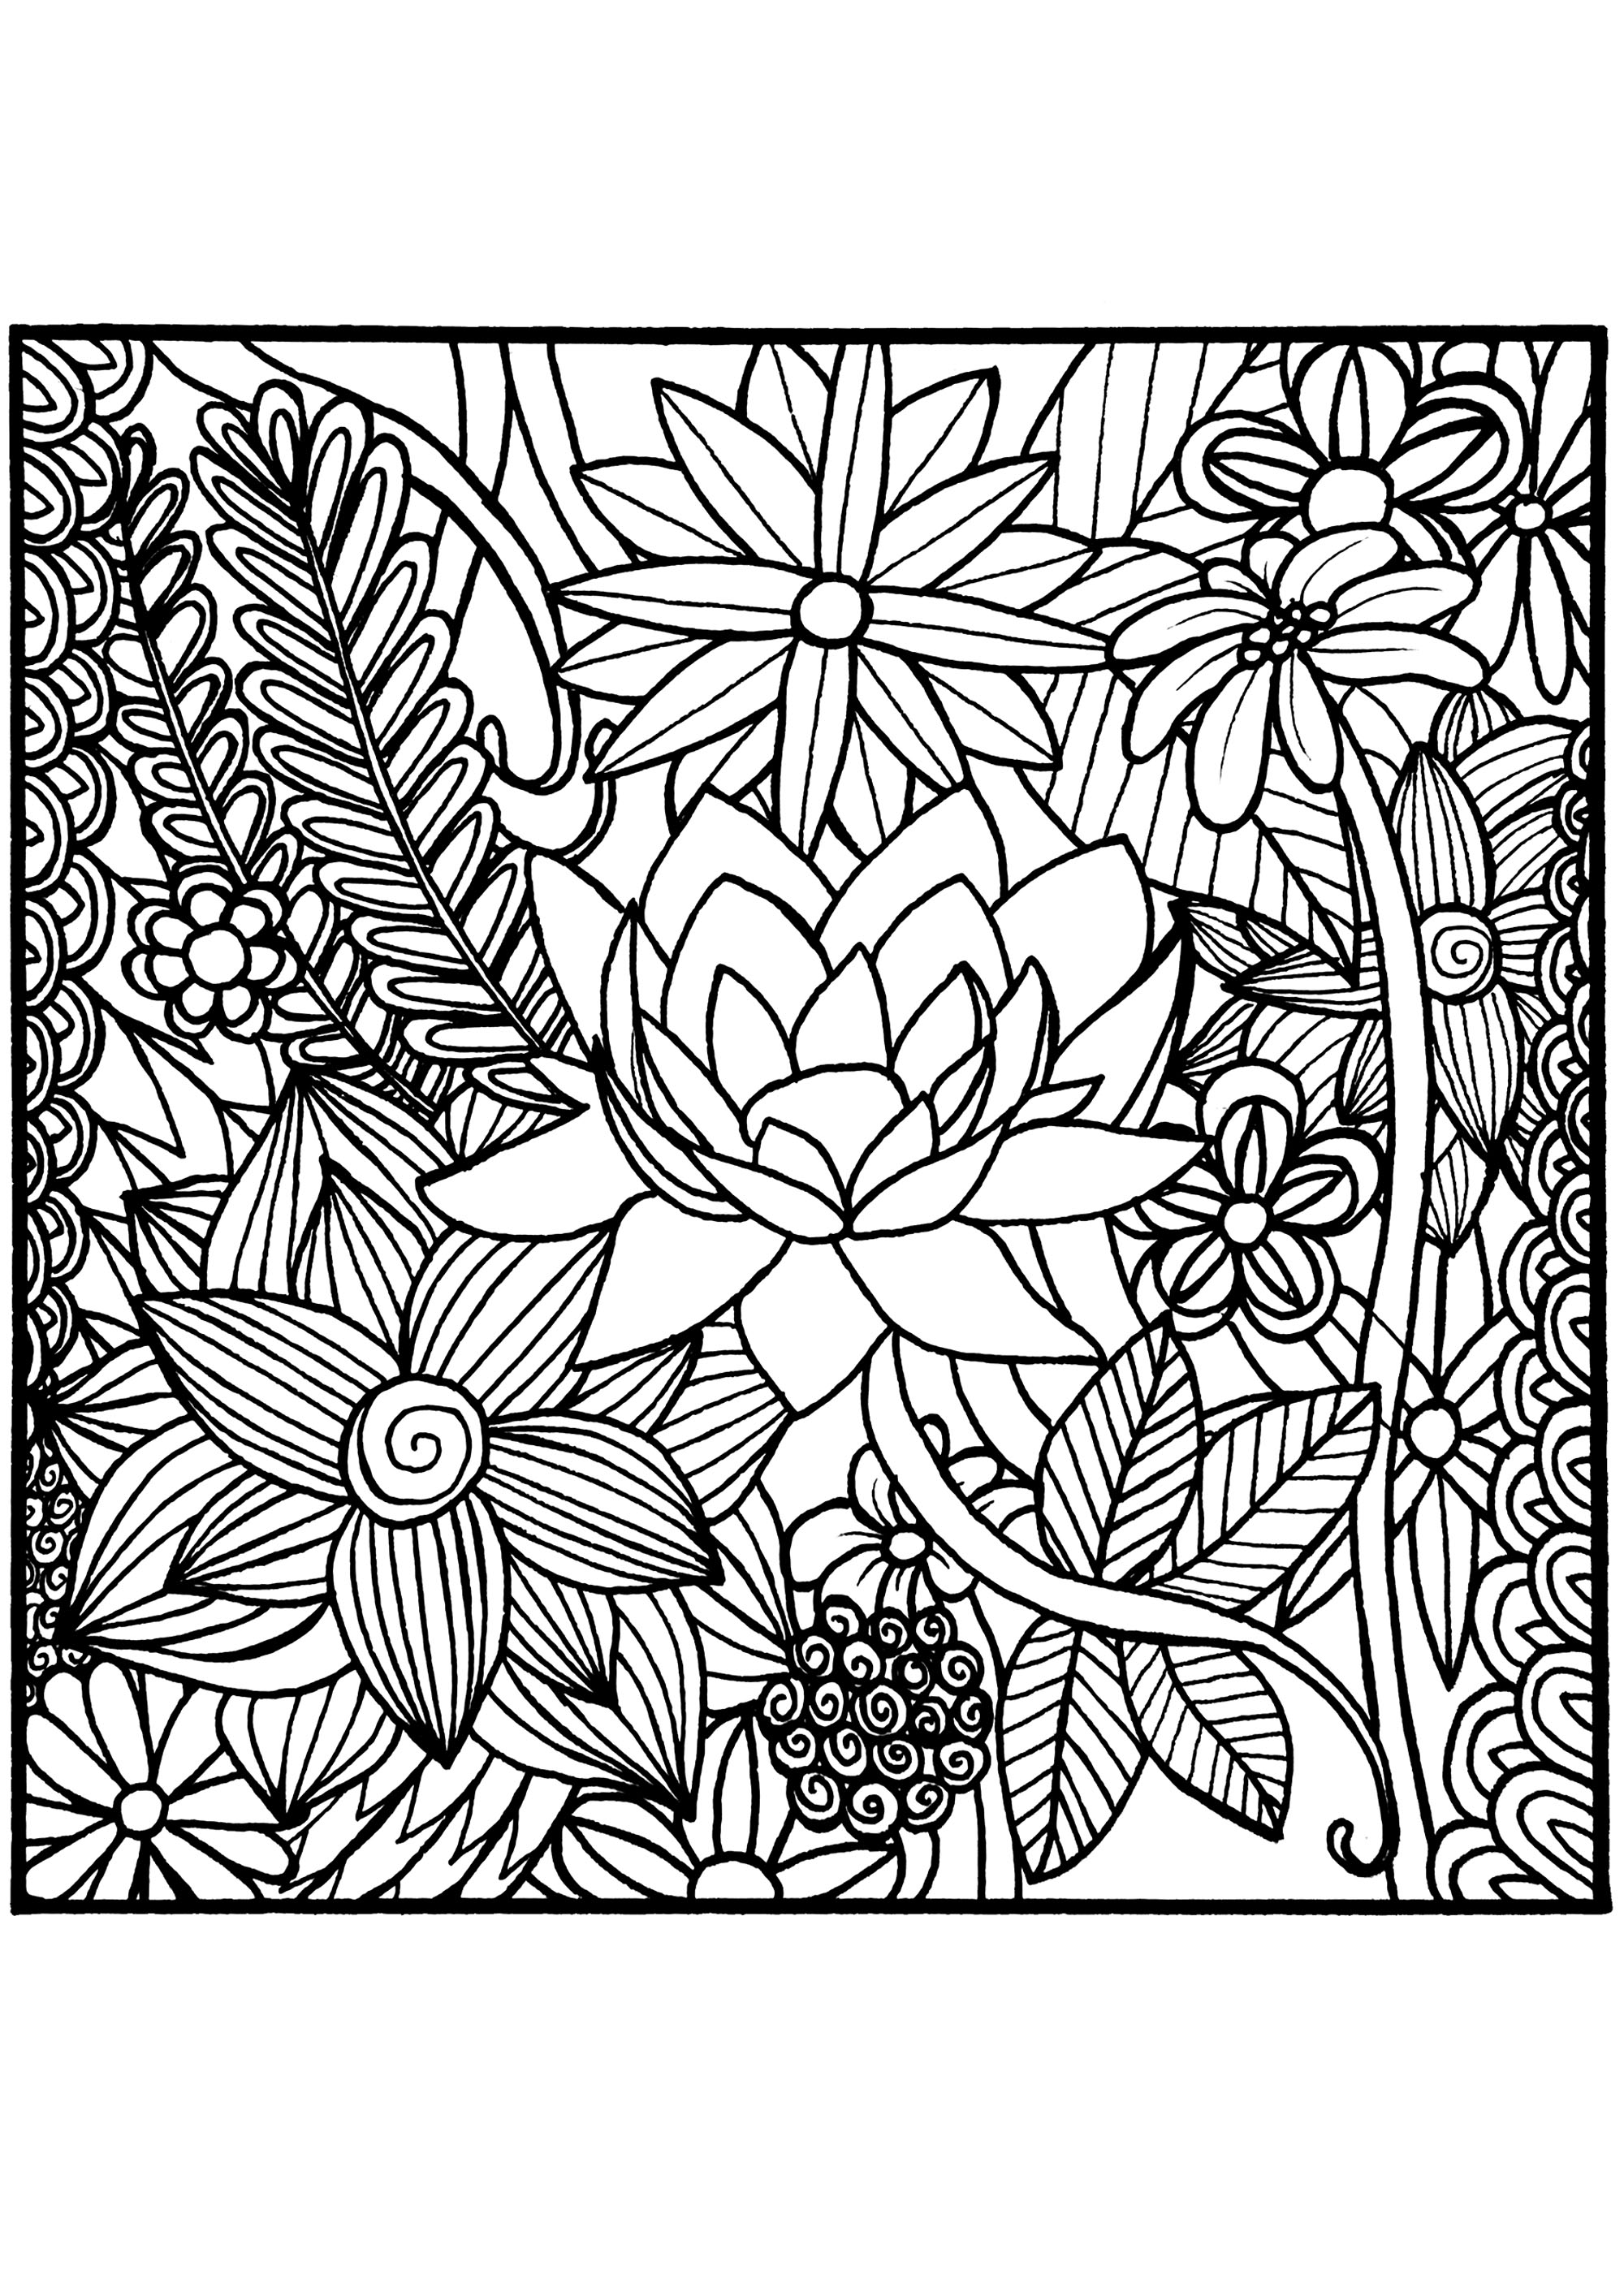 Download Flowers in a square - Flowers Adult Coloring Pages